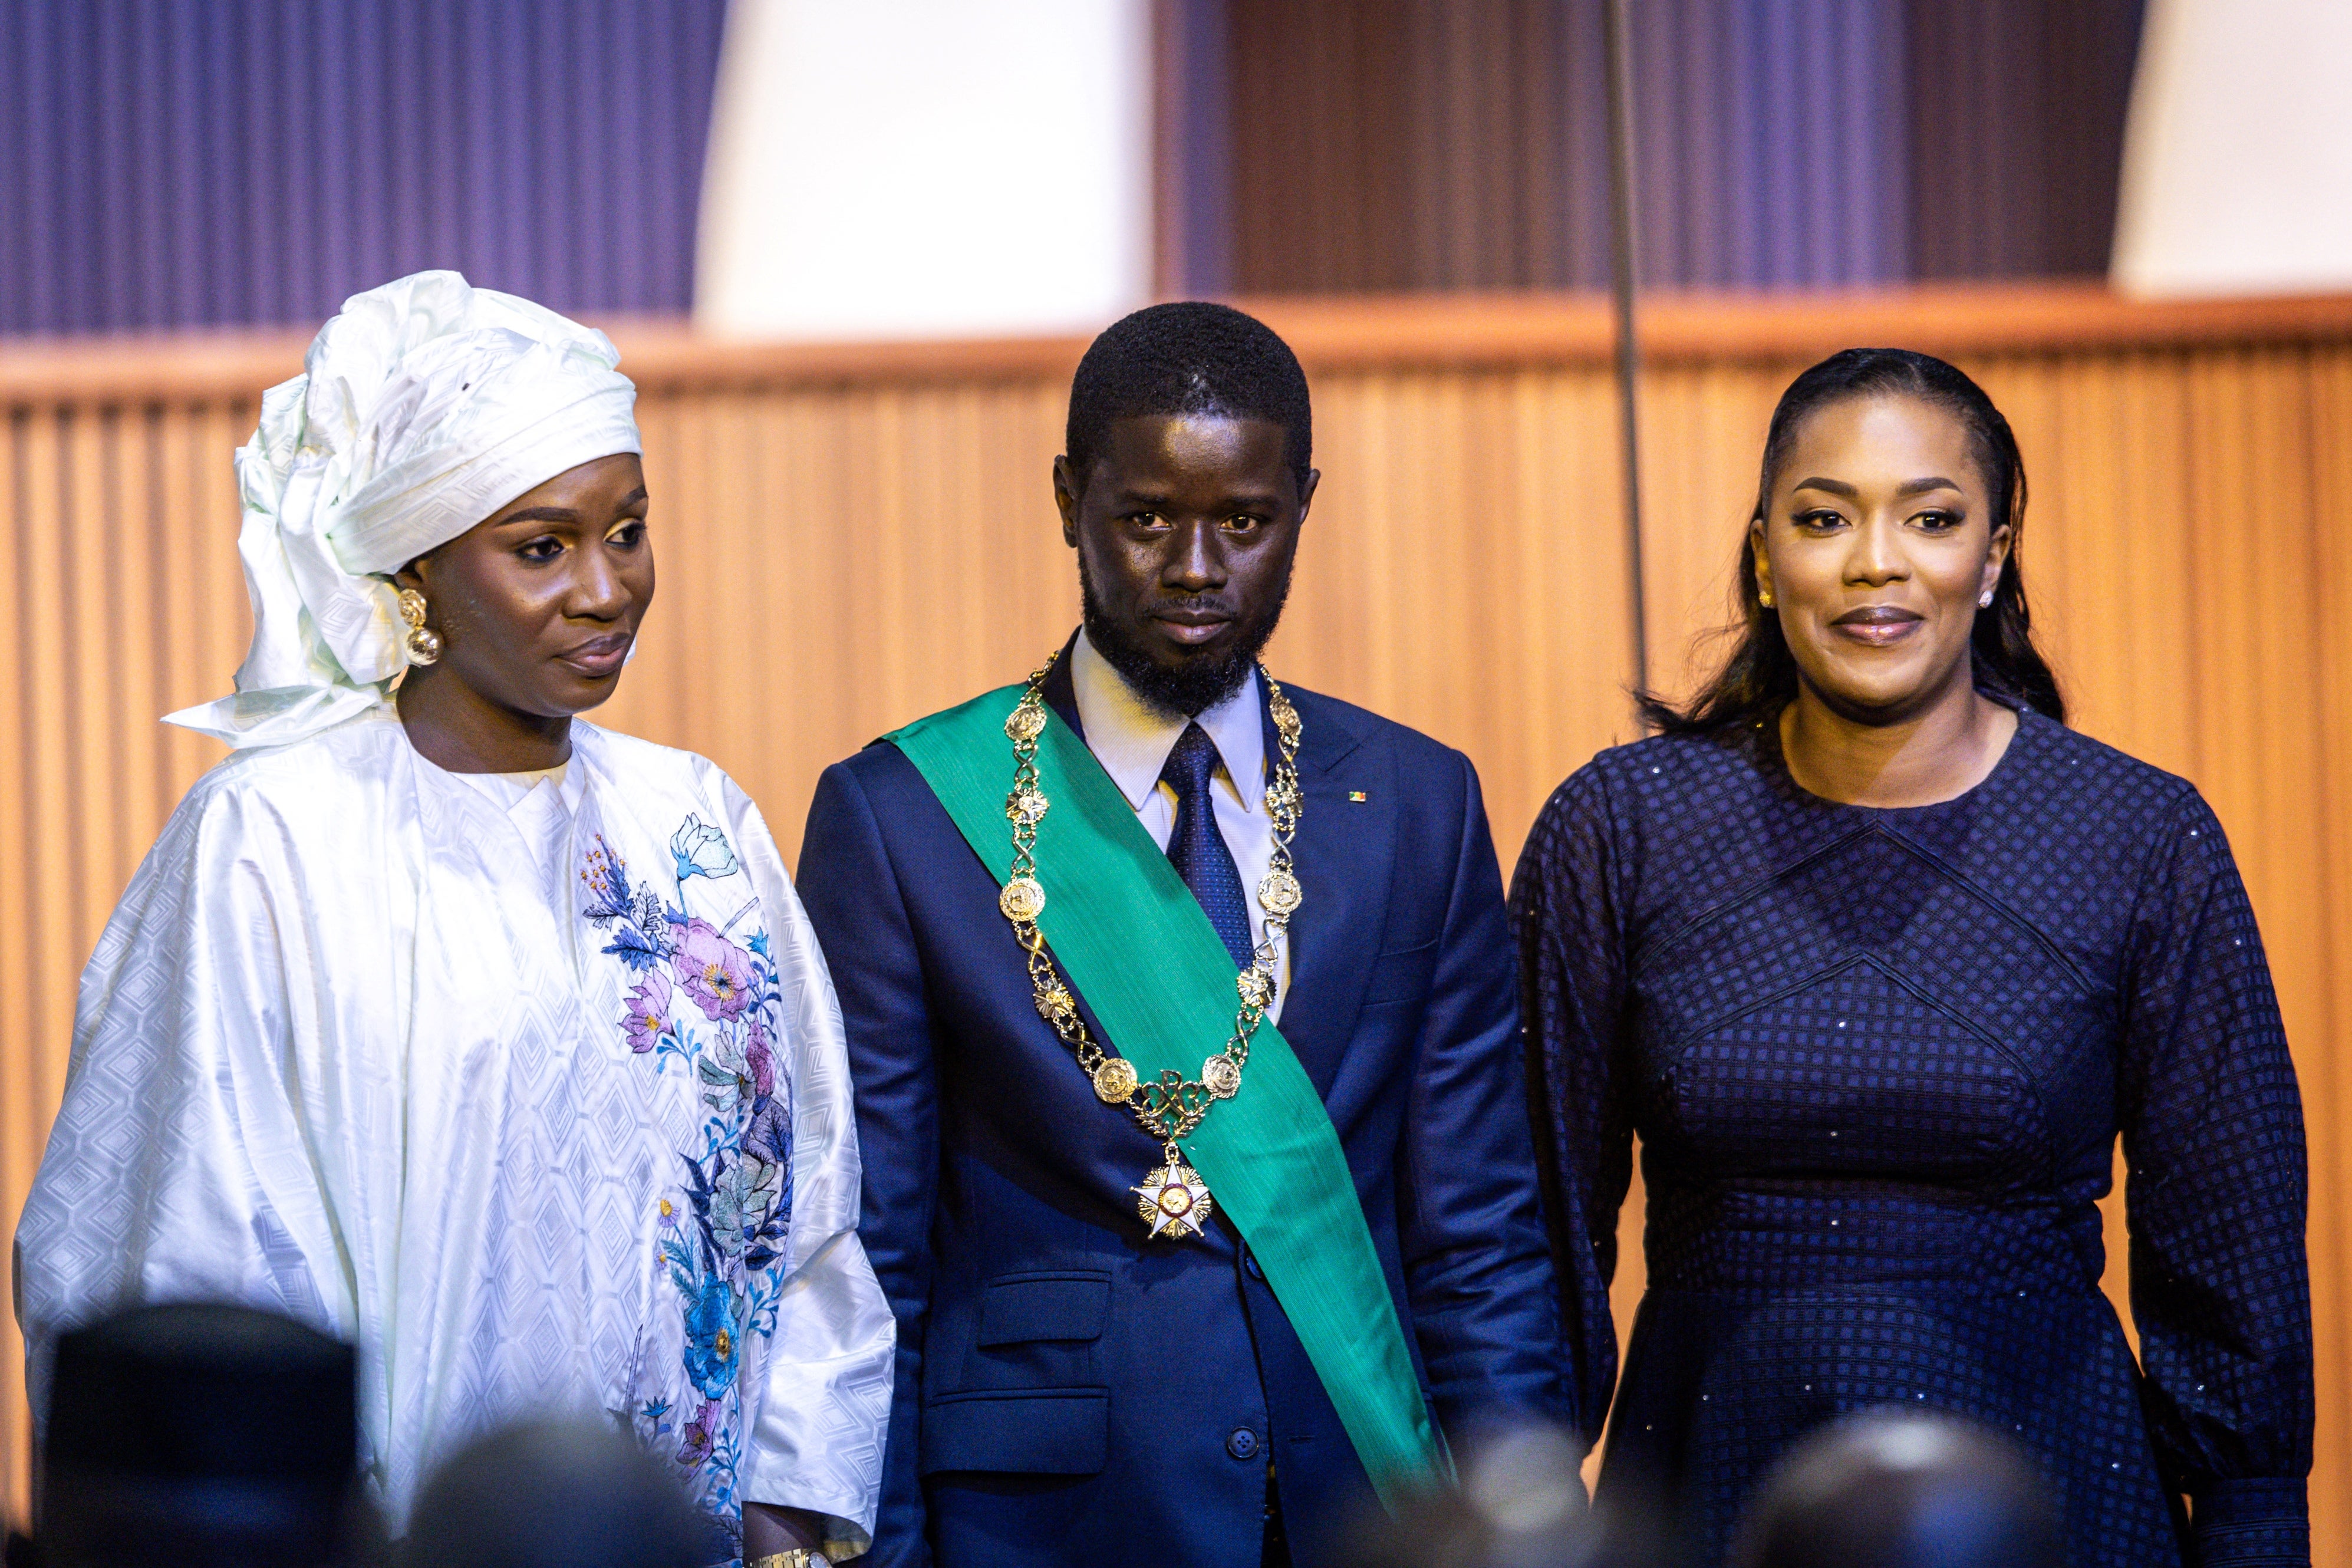 Bassirou Diomaye Faye with his wives Marie Khone Faye (L) and Absa Faye (R) at his swearing-in ceremony